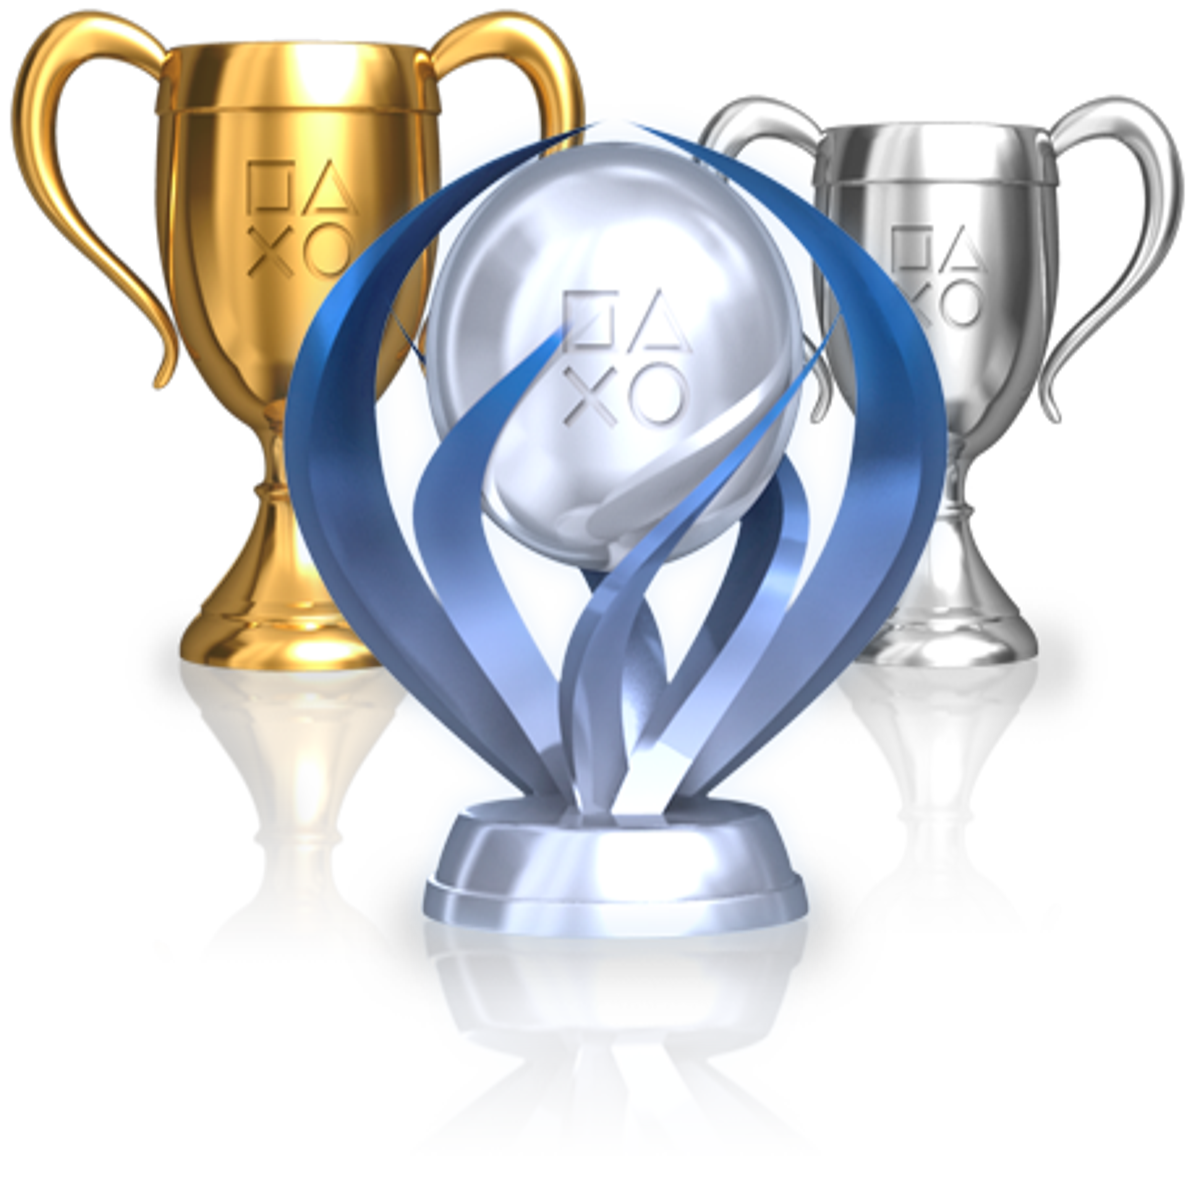 Upcoming Trophy levelling changes detailed – PlayStation.Blog